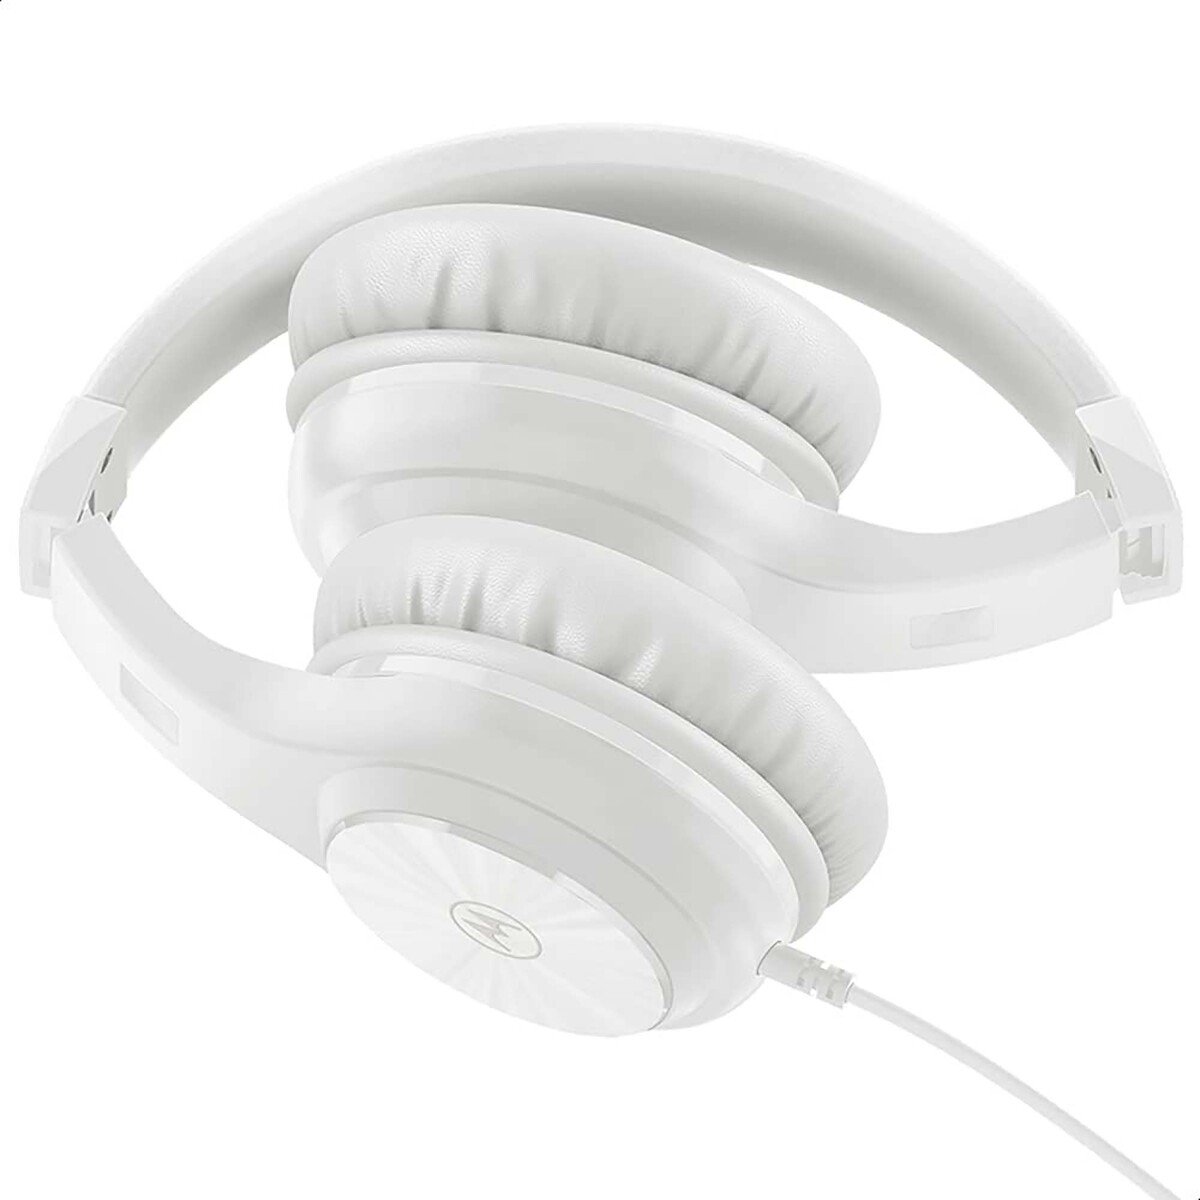 Motorola  MOTO XT 120 Black Wired Headphones with Enhanced Bass, 3.5mm Jack In-Line Mic and Voice Assistant, White